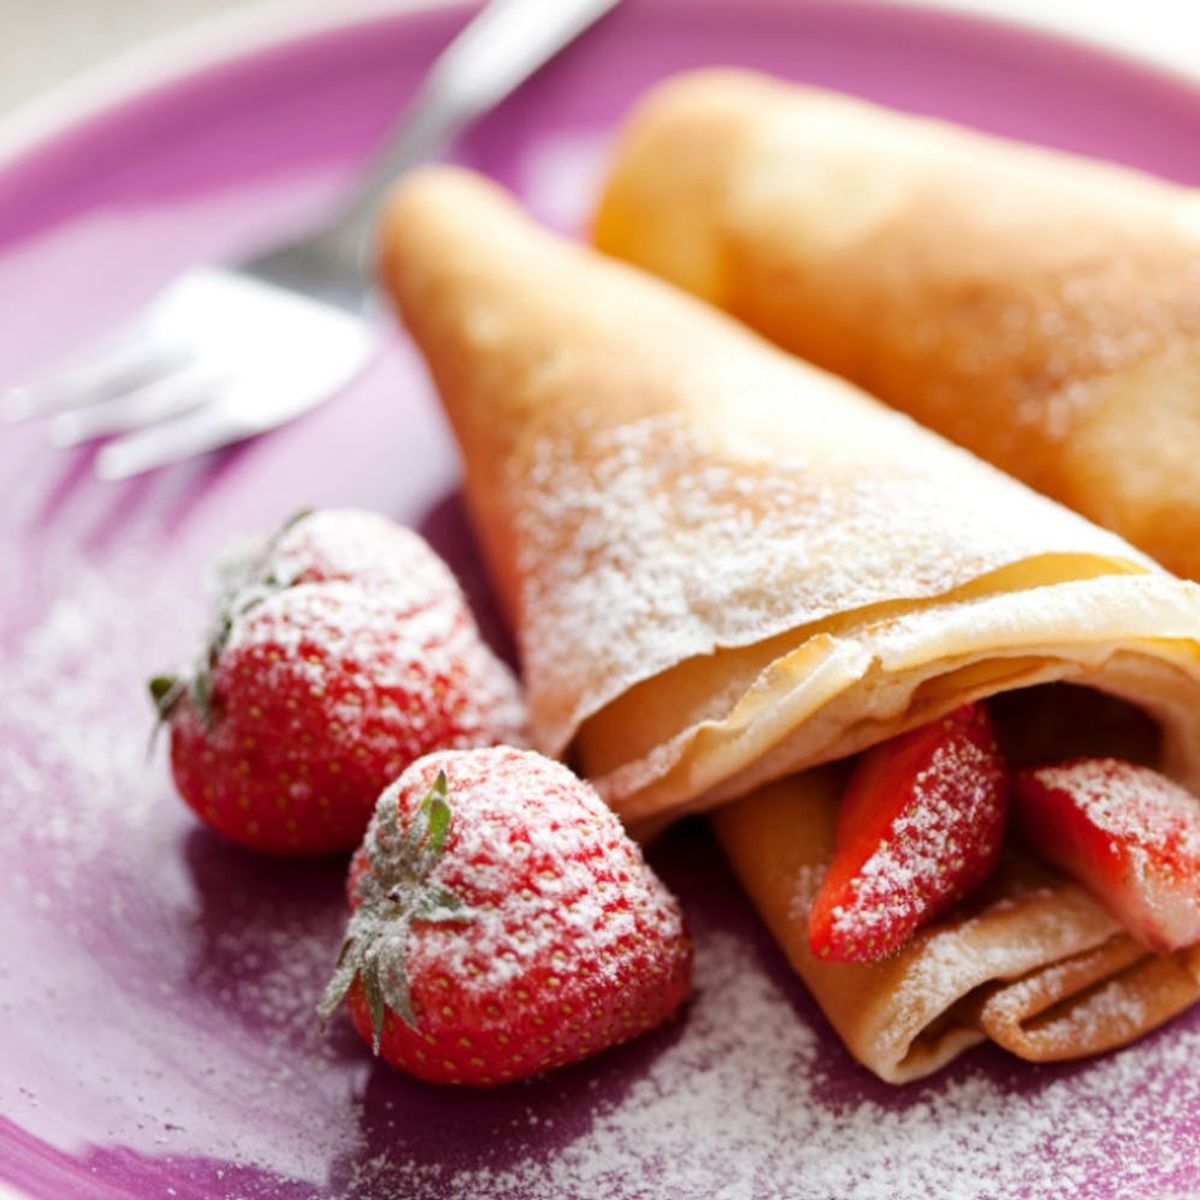 Crepe Recipes: From Sweet to Savory and Everything in Between